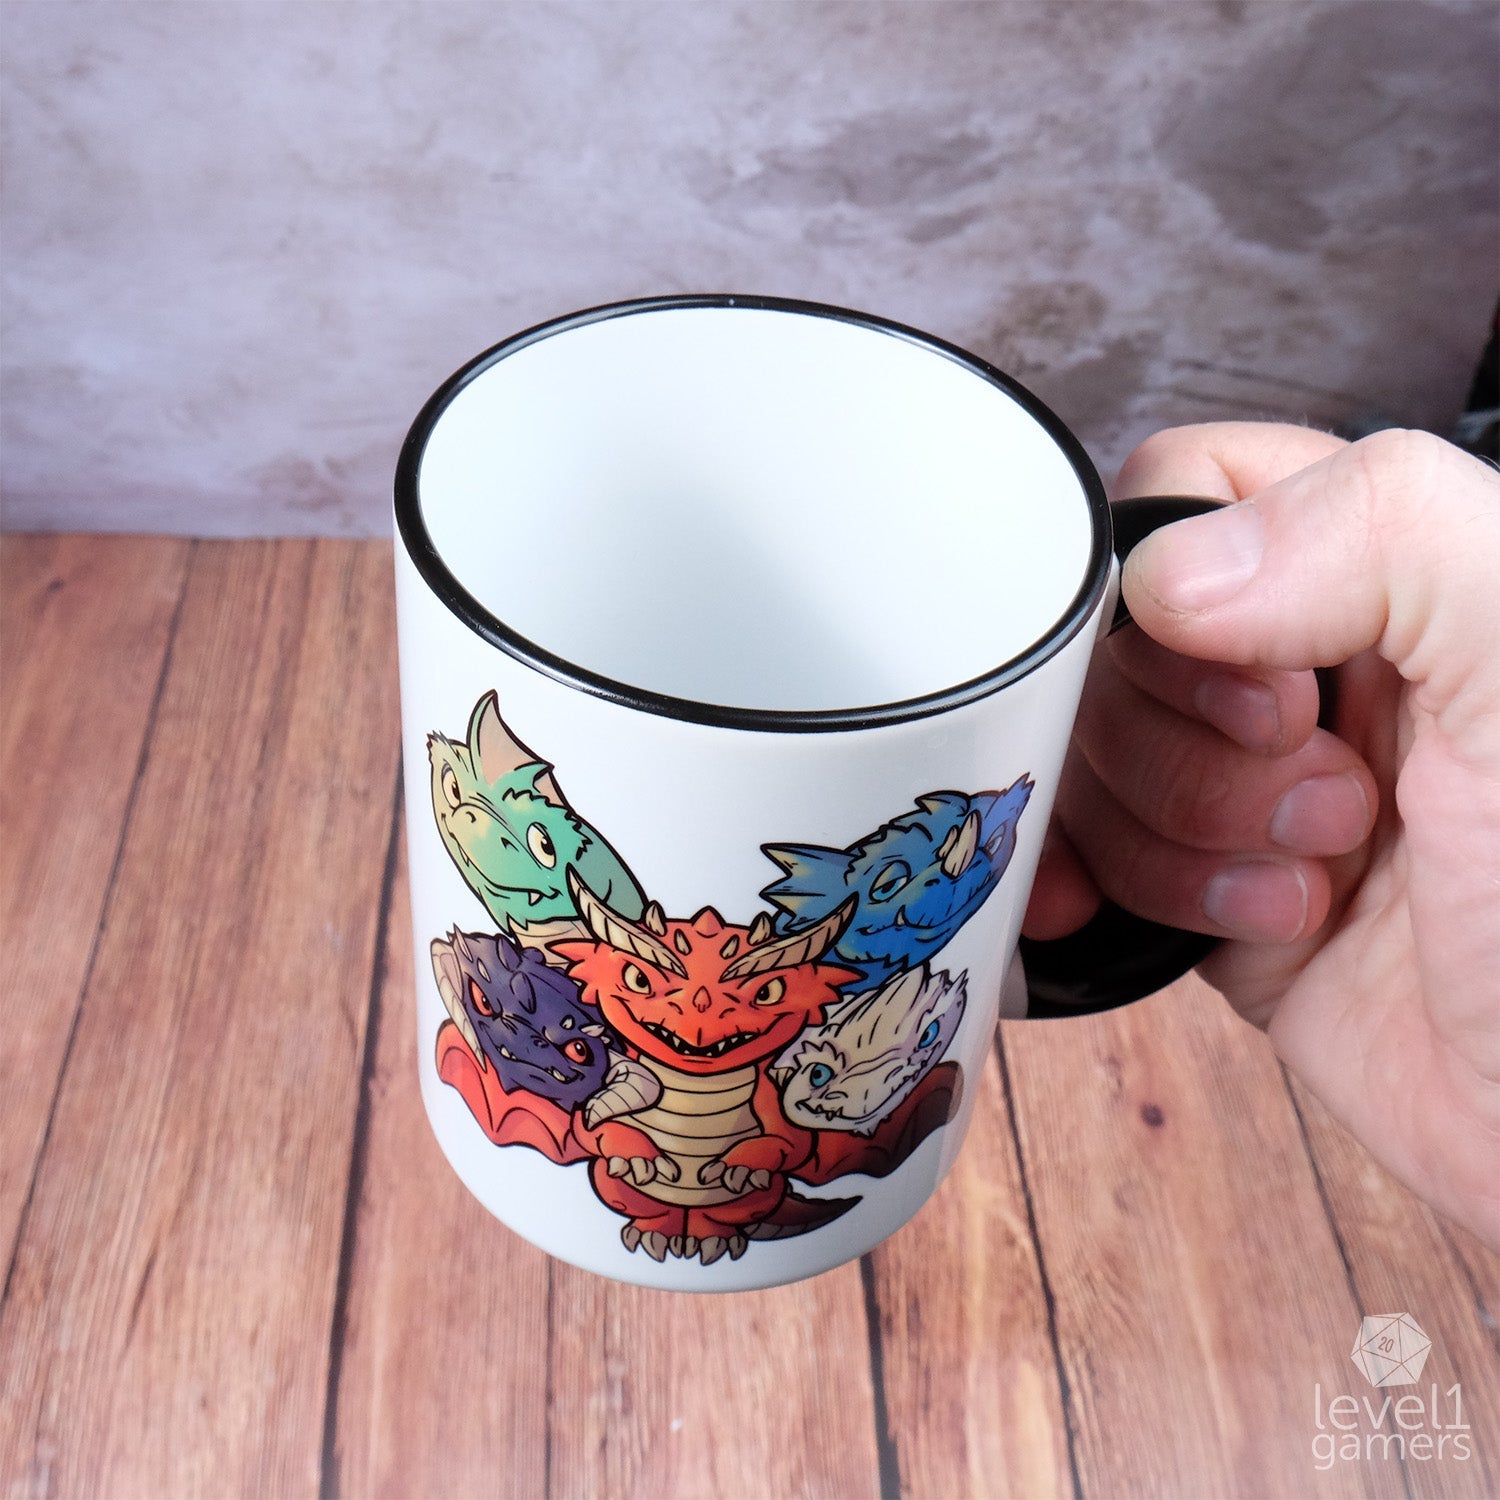 Little Queen of Dragons Mug - AKA Lil T  Level 1 Gamers   